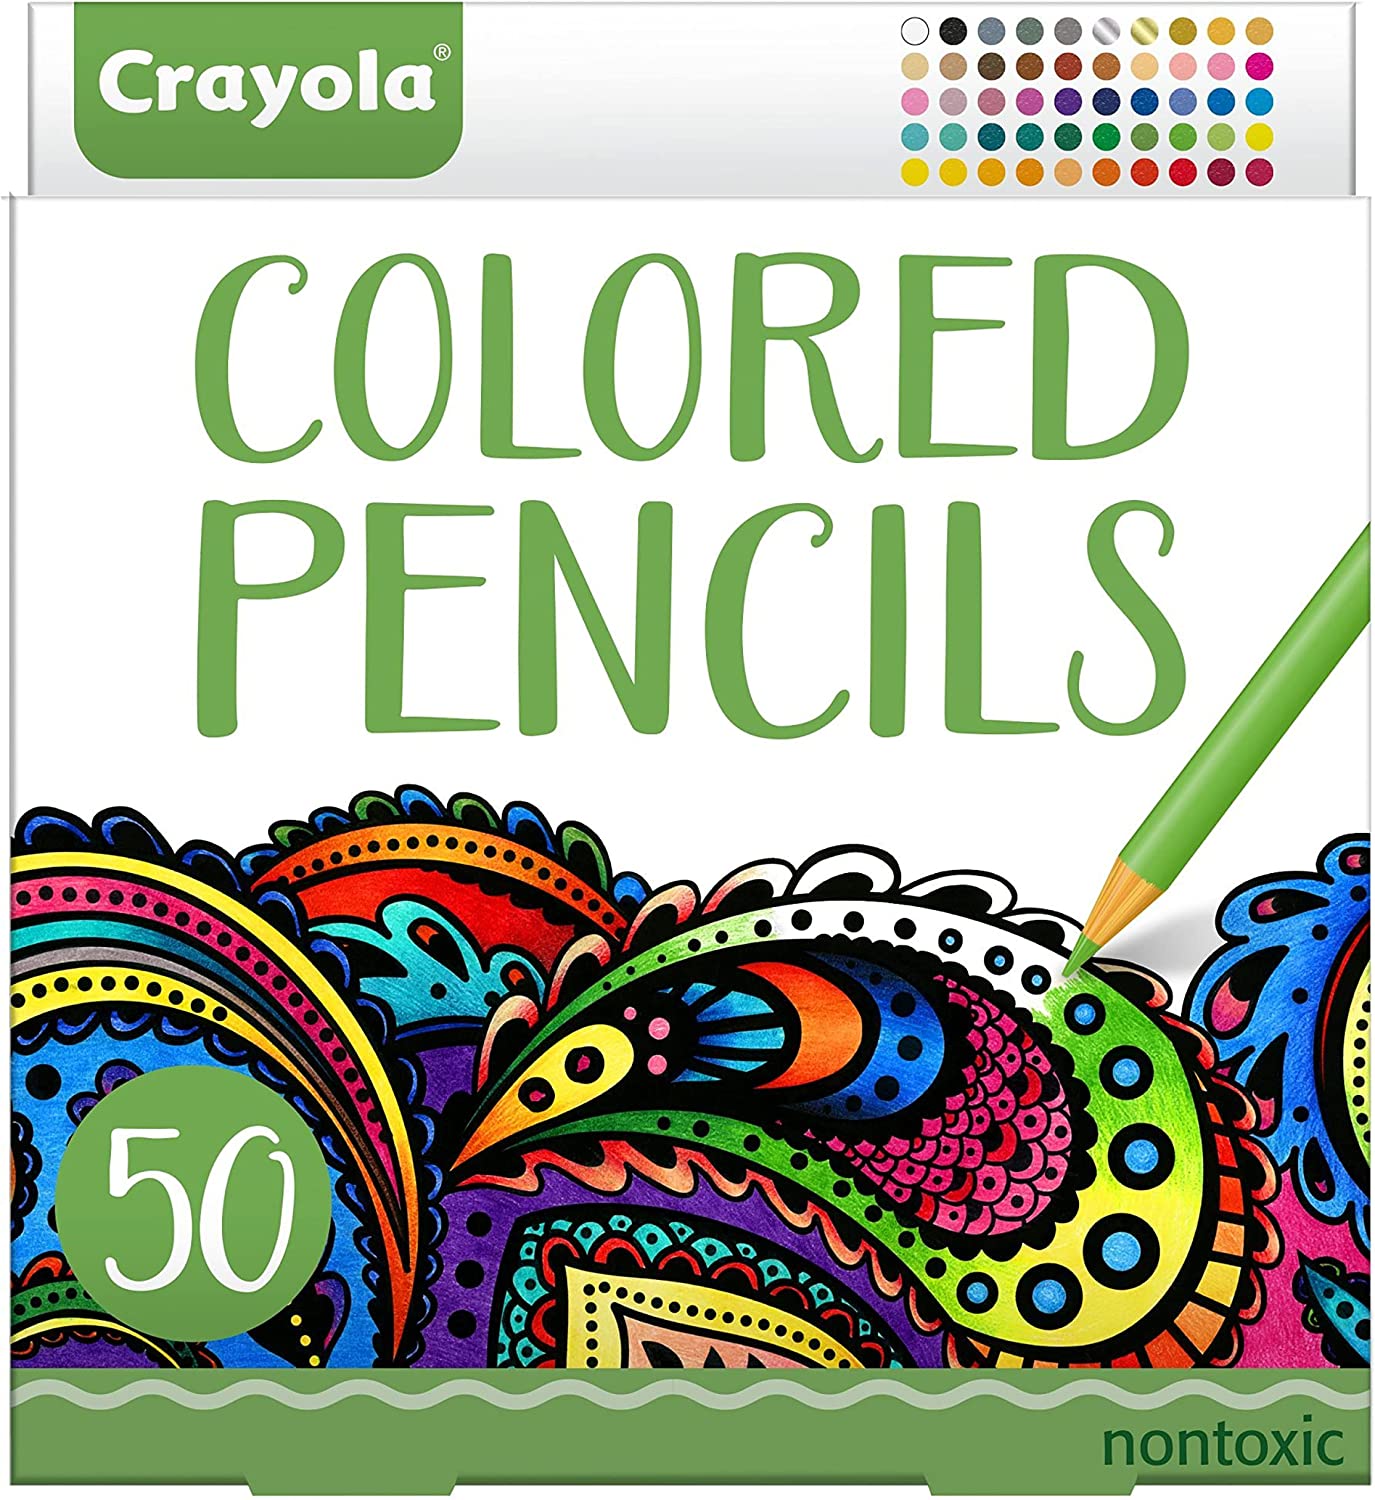 Crayola Colored Pencils For Adults (50 Count), Colored [...]